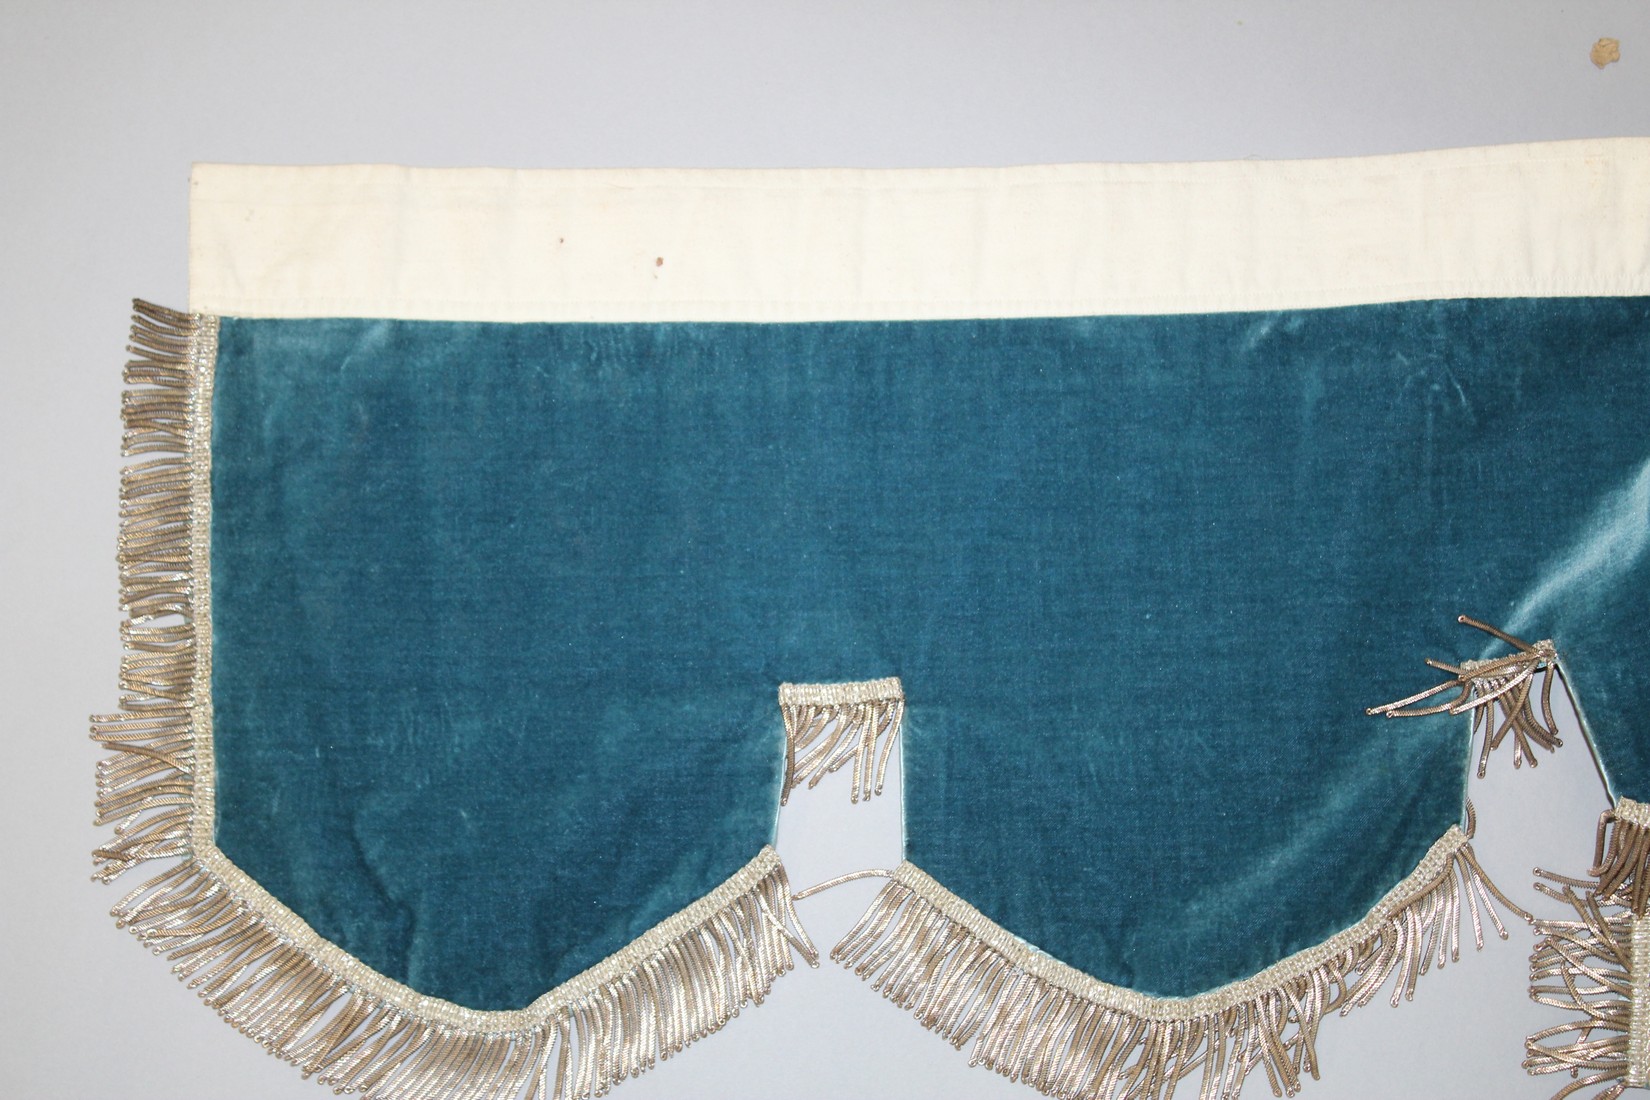 A FINELY EMBROIDERED BLUE VELVET BED HANGING. - Image 5 of 9